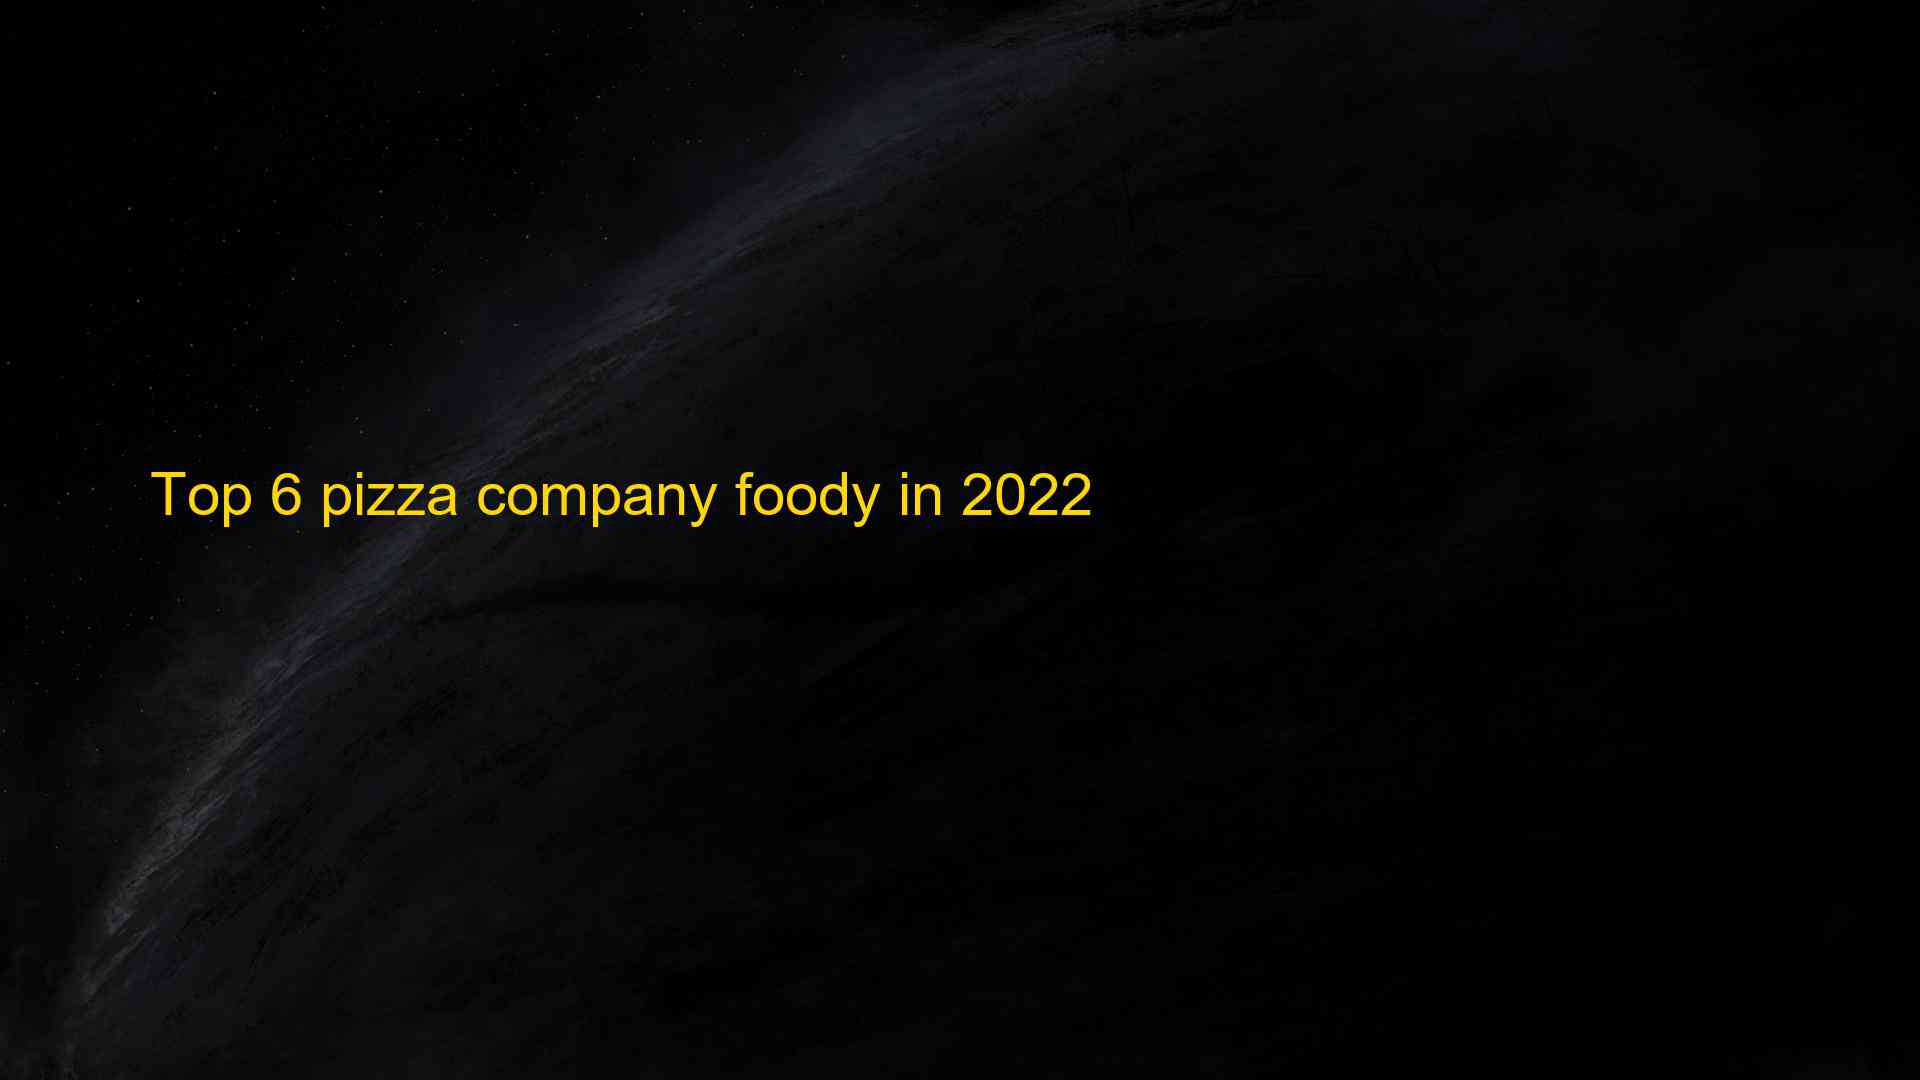 Top 6 pizza company foody in 2022 1660108994